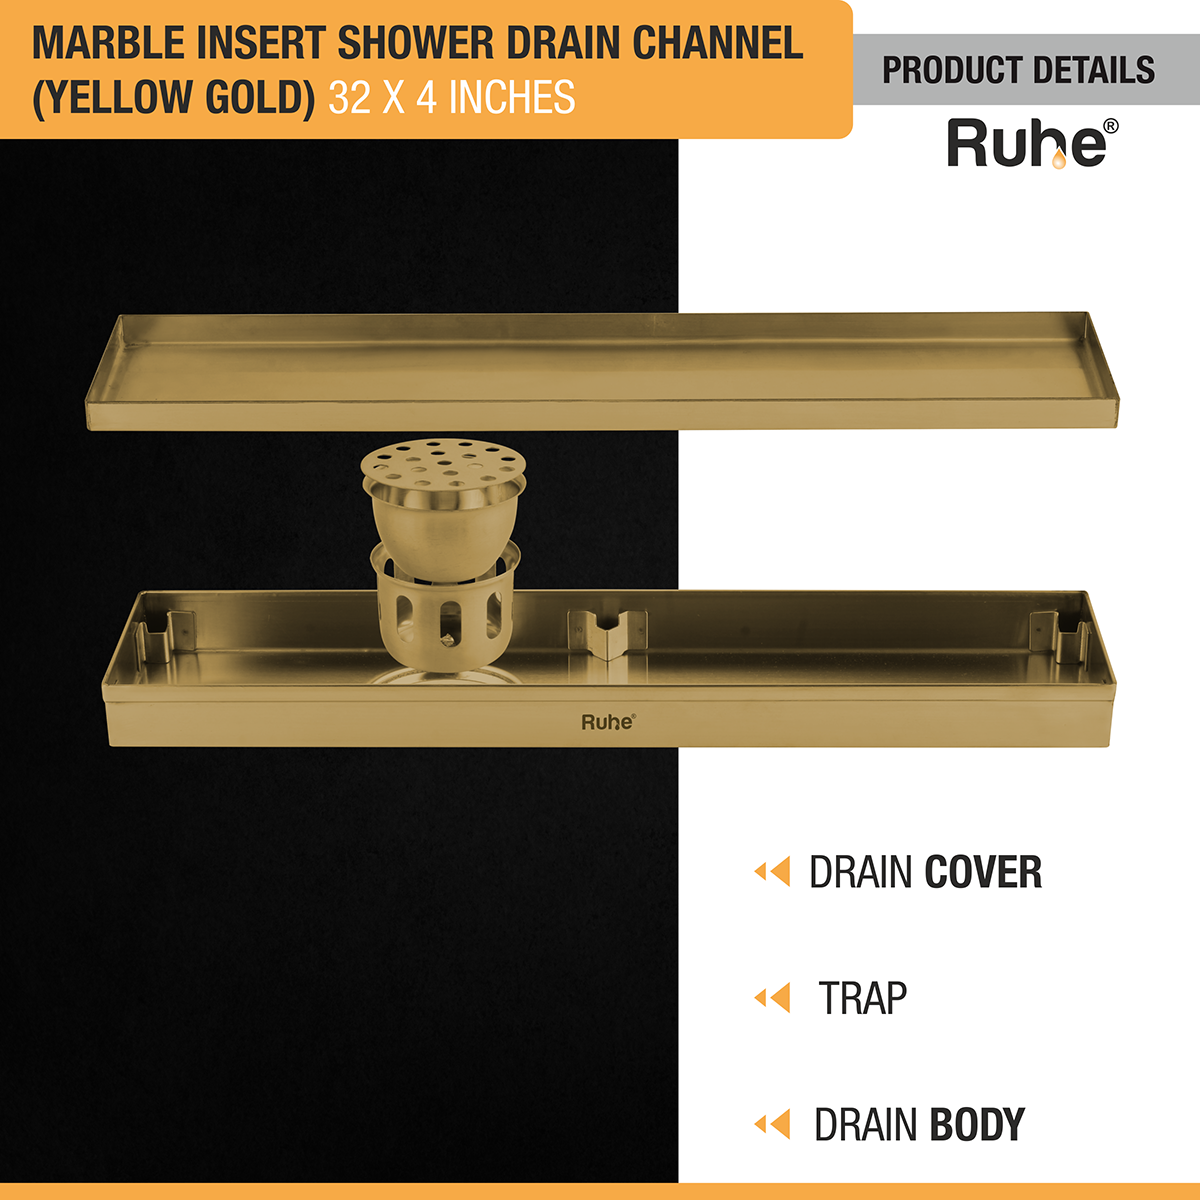 Marble Insert Shower Drain Channel (32 x 4 Inches) YELLOW GOLD PVD Coated with drain cover, trap, and drain body